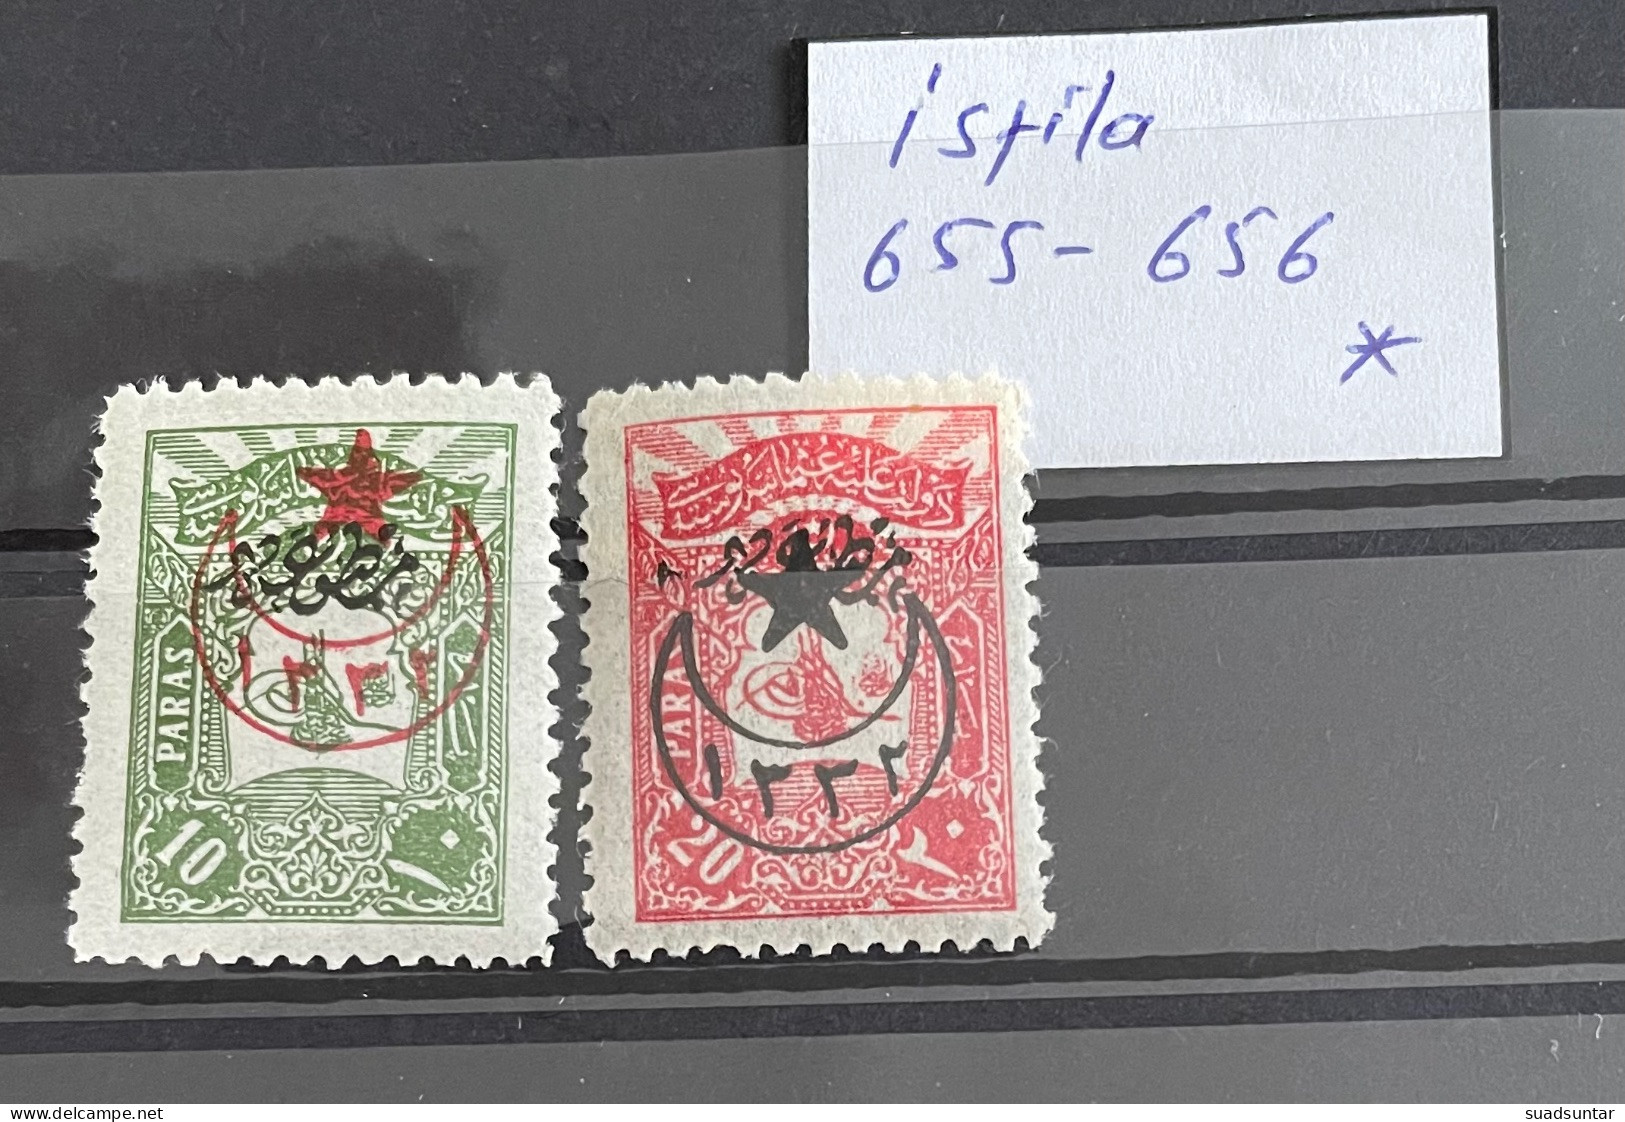 1916 5 Star Overprinted Stamps MH Isfila 655-656 High Values - Nuevos